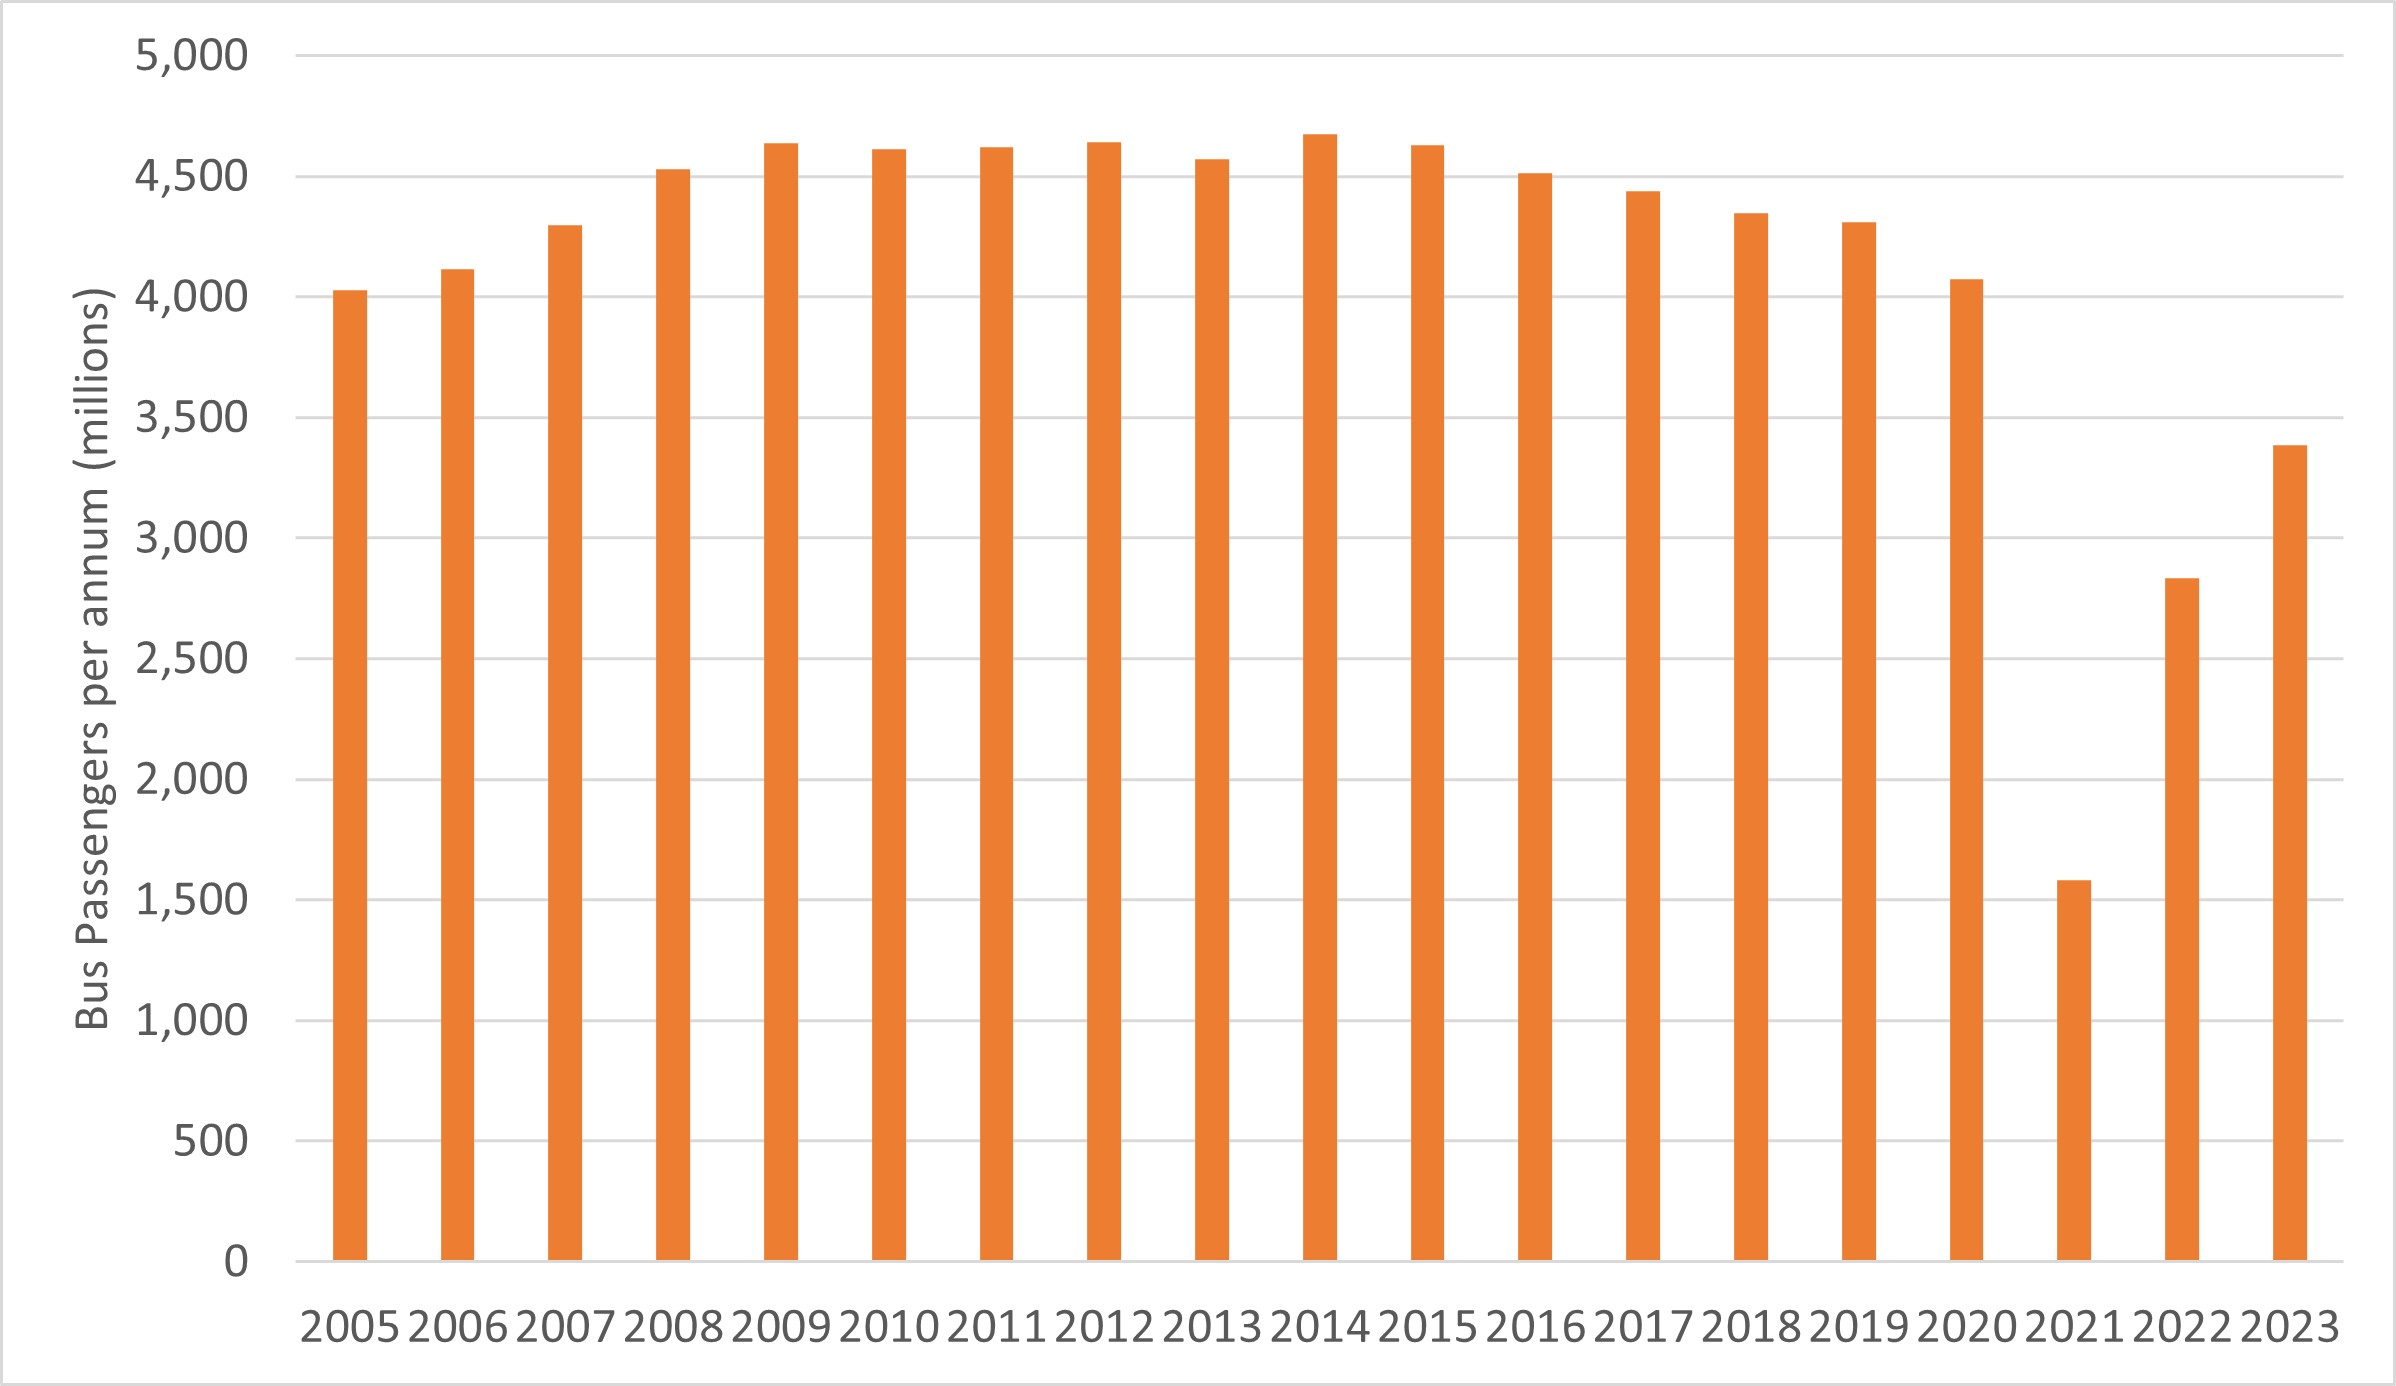 number of bus passengers per annum. 2023 showed an increase from 2020, but its still below pre-COVID levels